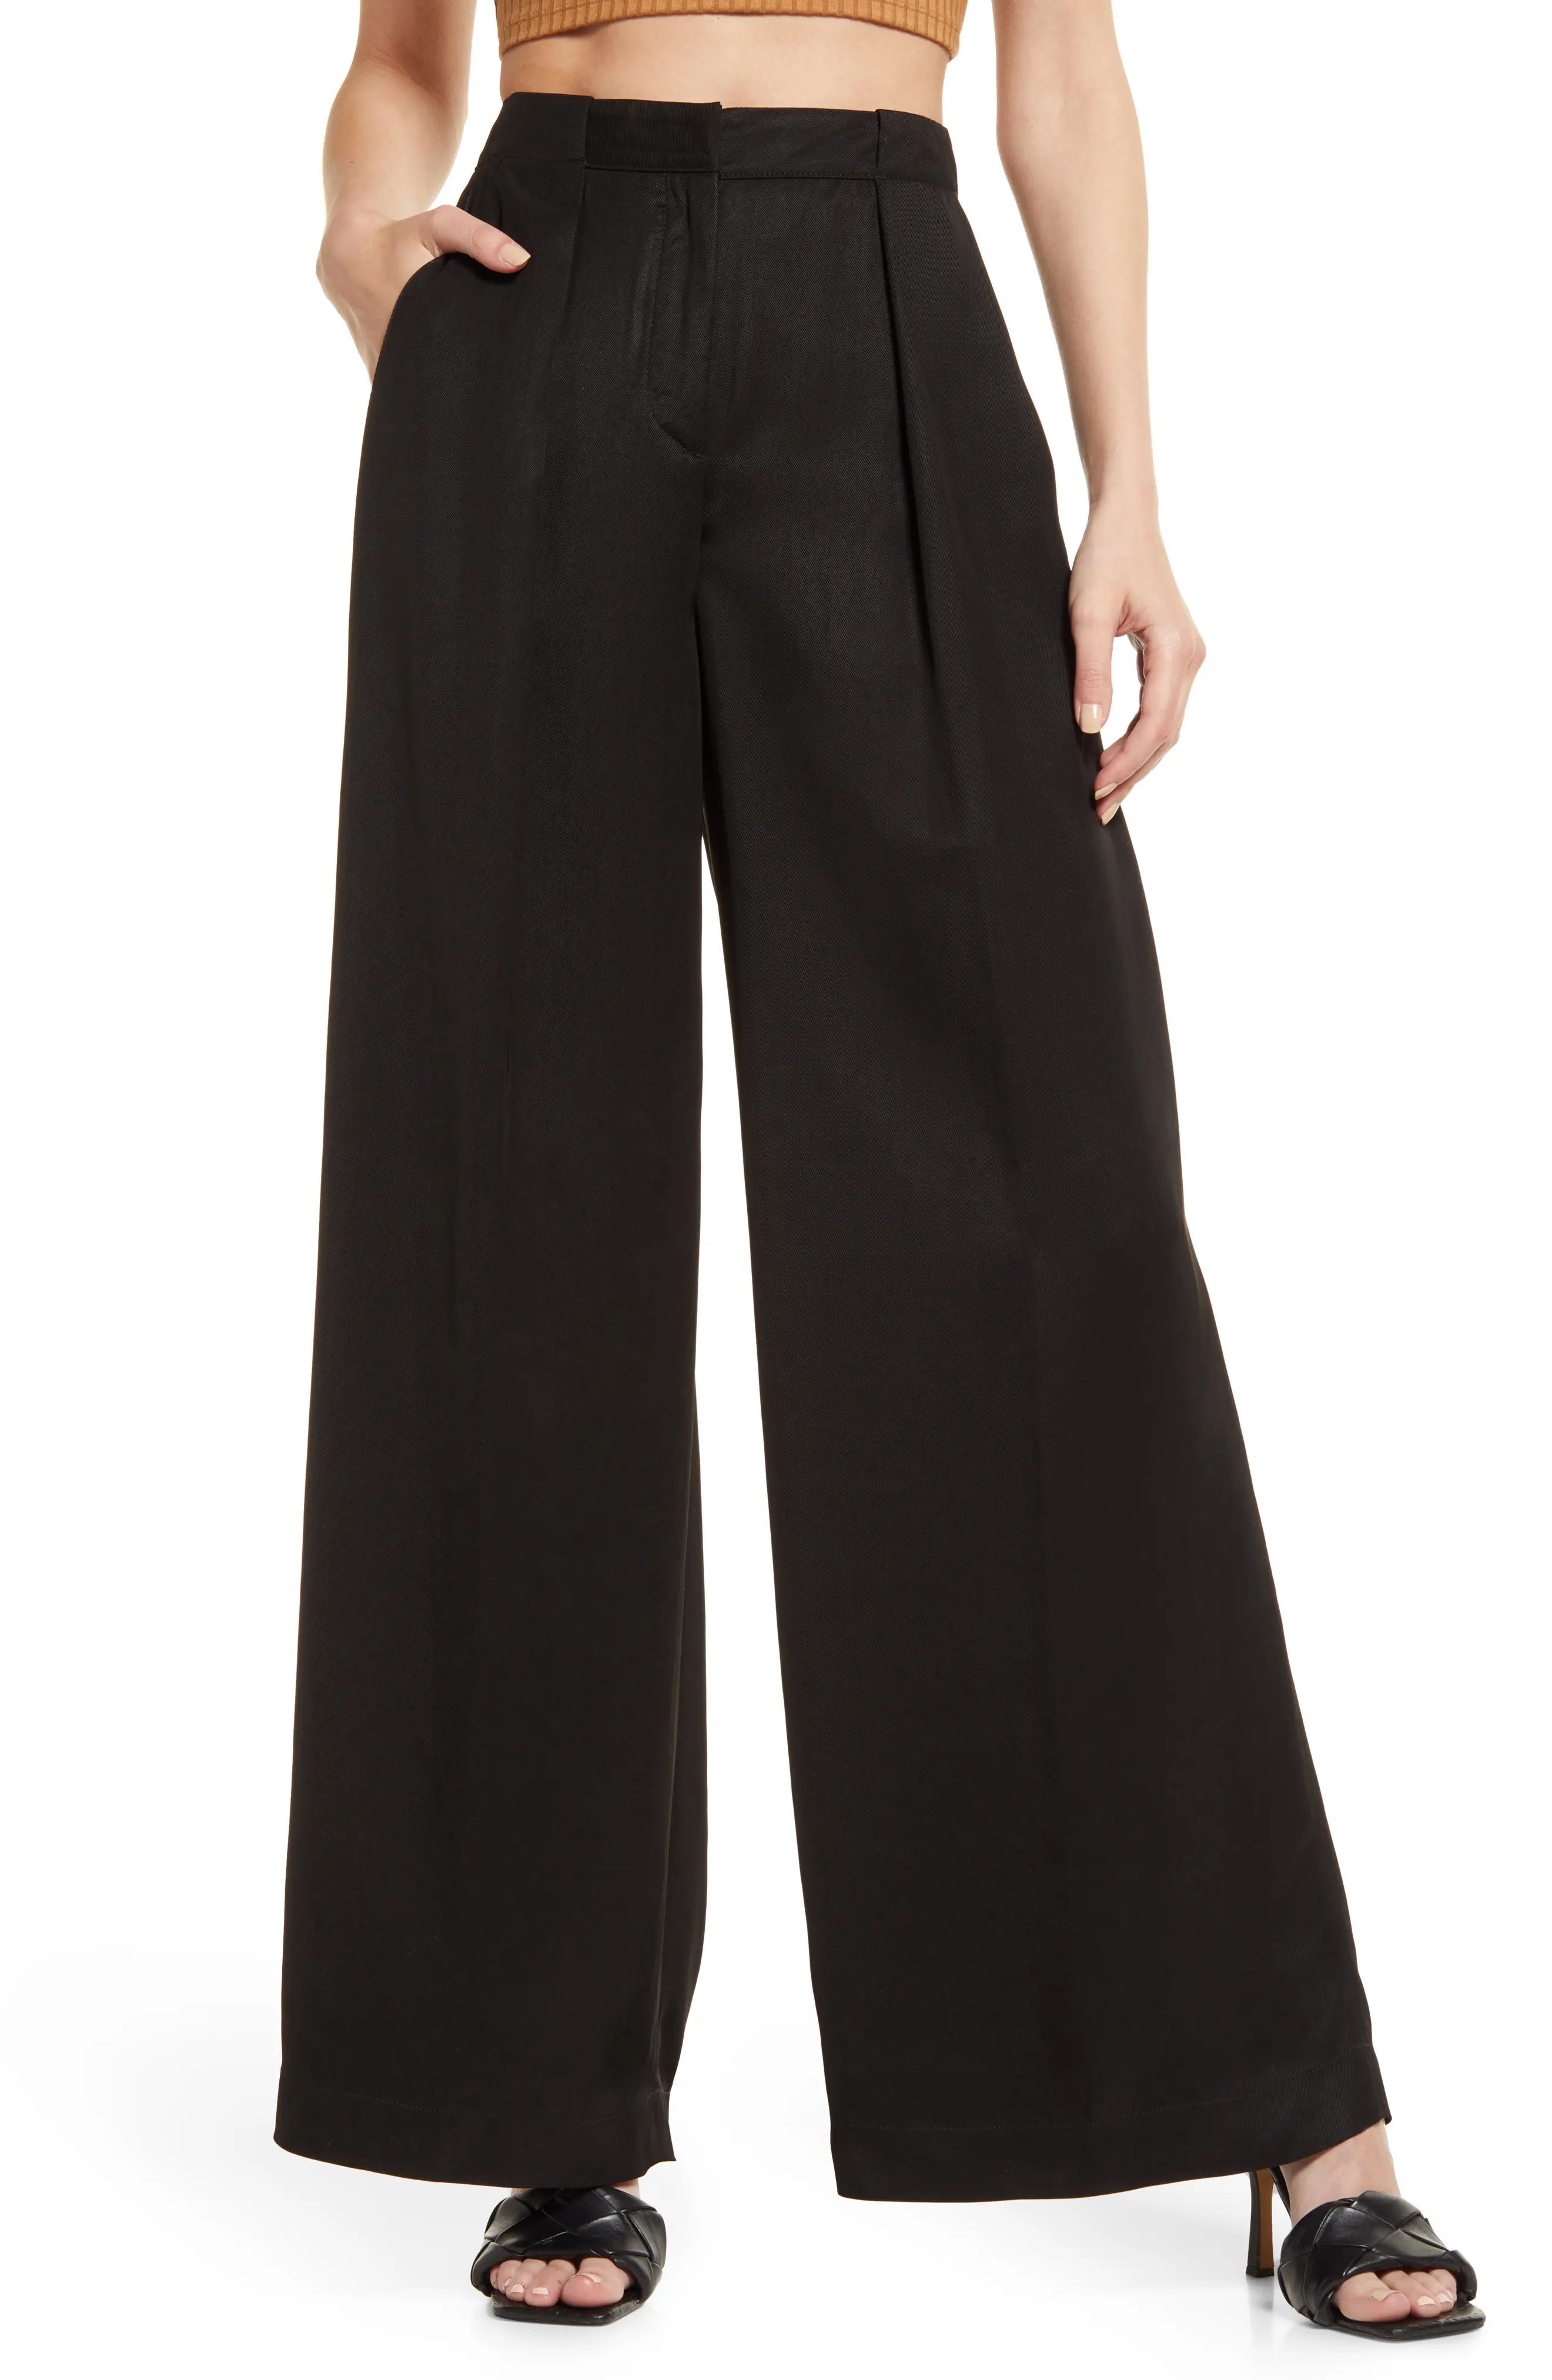 Closed Rylan High Waist Wide Leg Trousers in Black at Nordstrom, Size 25 | Nordstrom